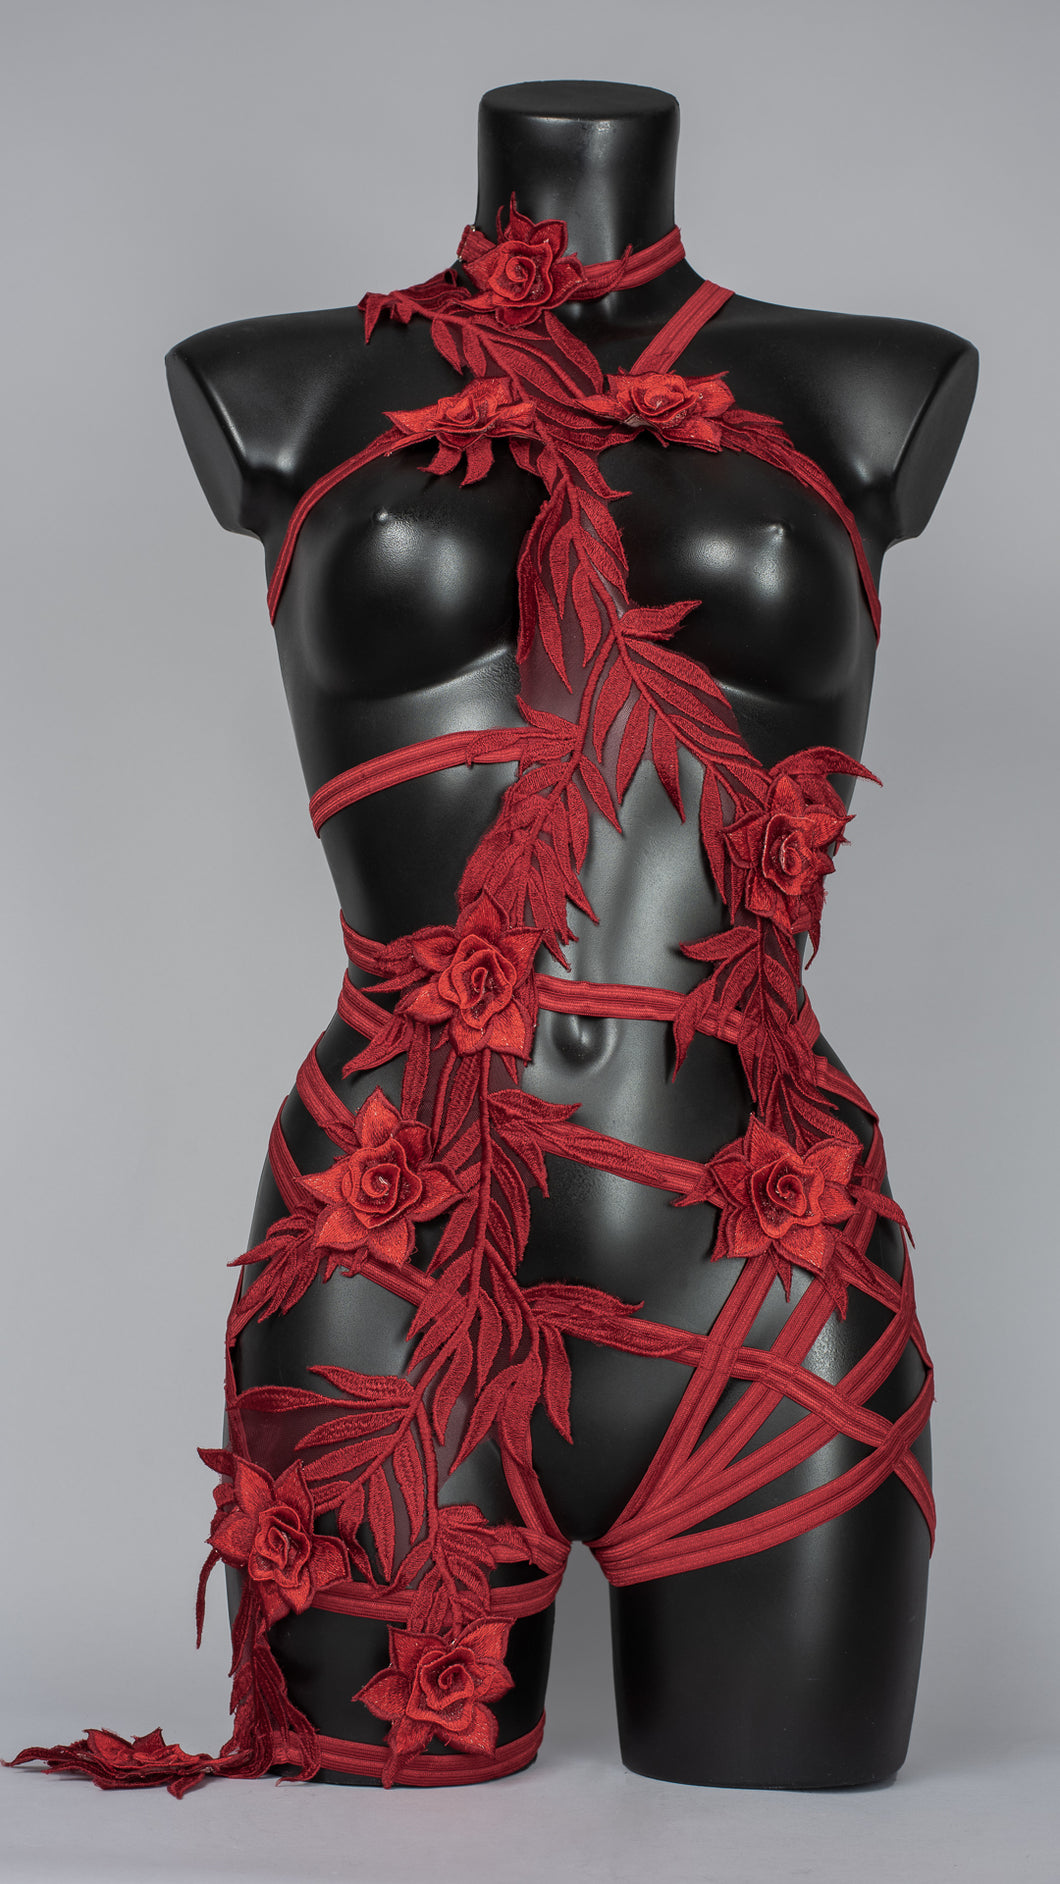 LA ROSA - Romantic Leaves and Roses Bodycage